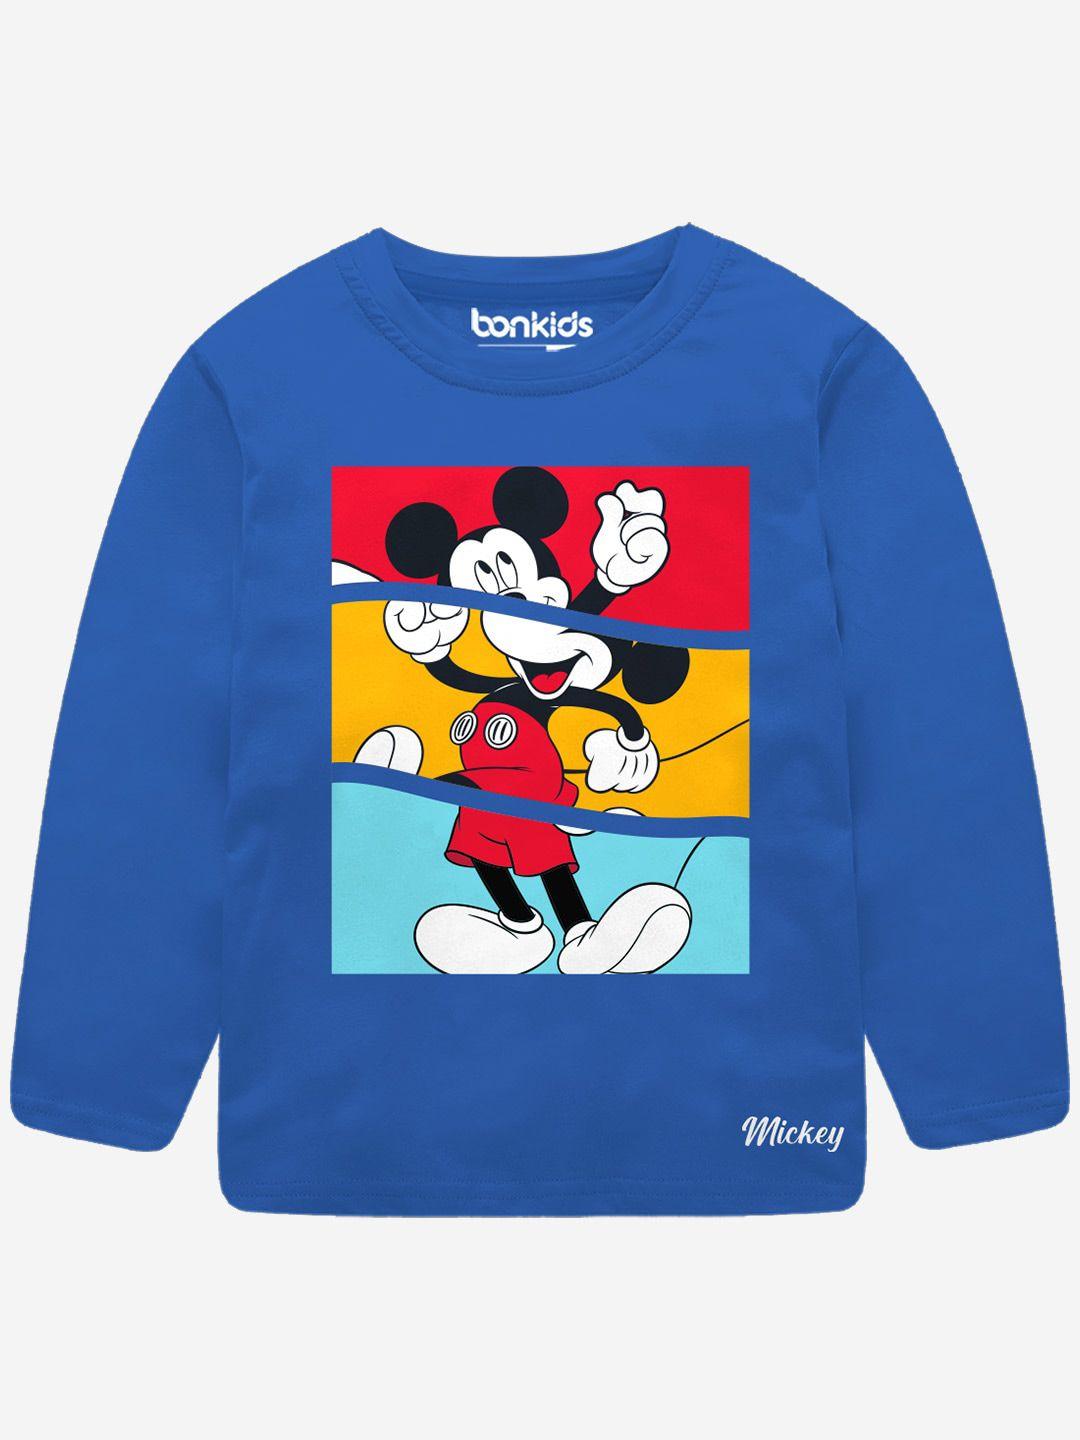 bonkids-boys-humour-and-comic-mickey-mouse-printed-cotton-t-shirt